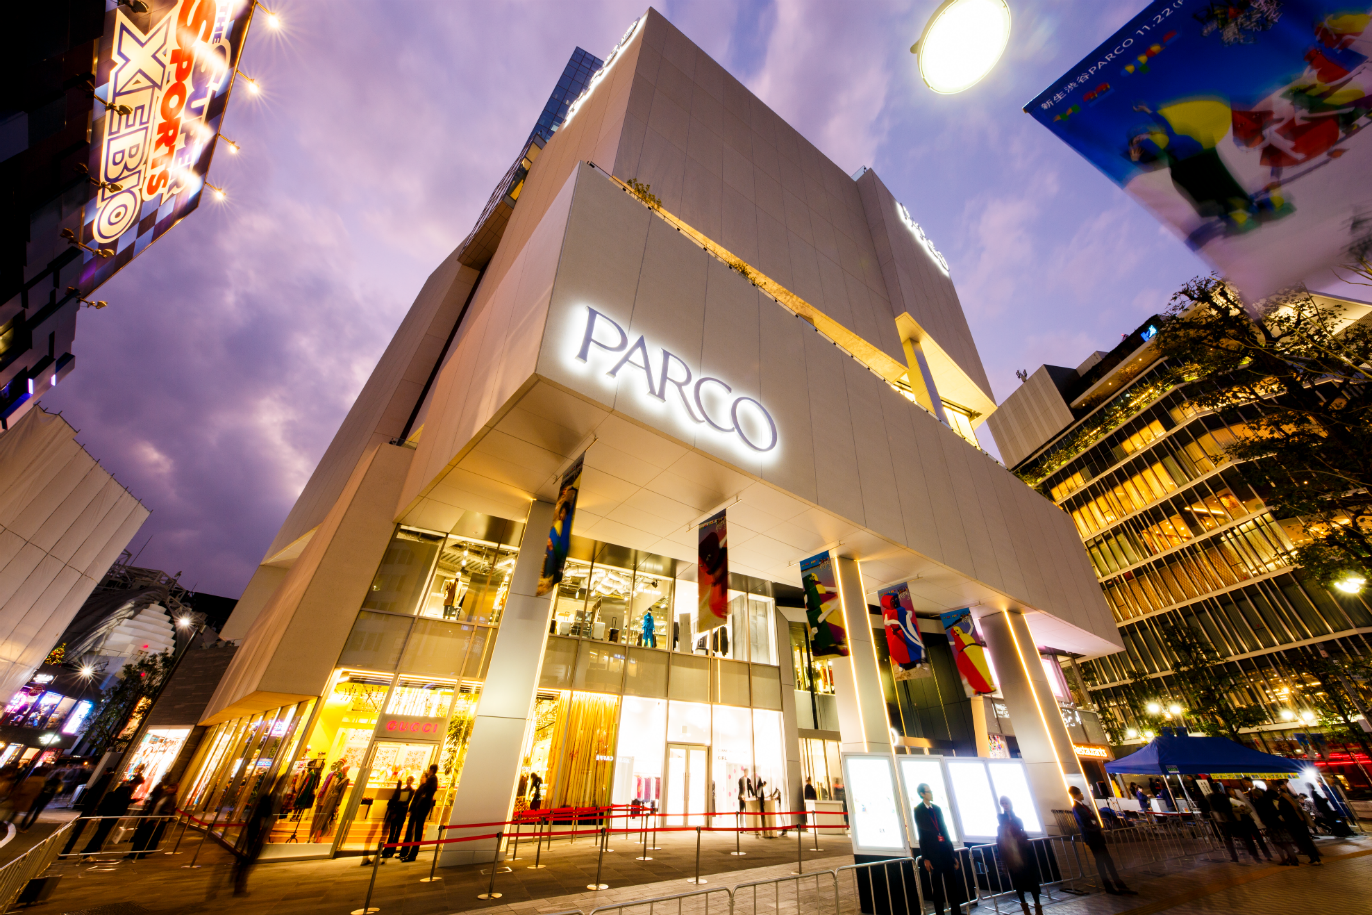 Why Malls Aren’t Dead in Japan: A Shopping Spree through Shibuya’s PARCO Mall